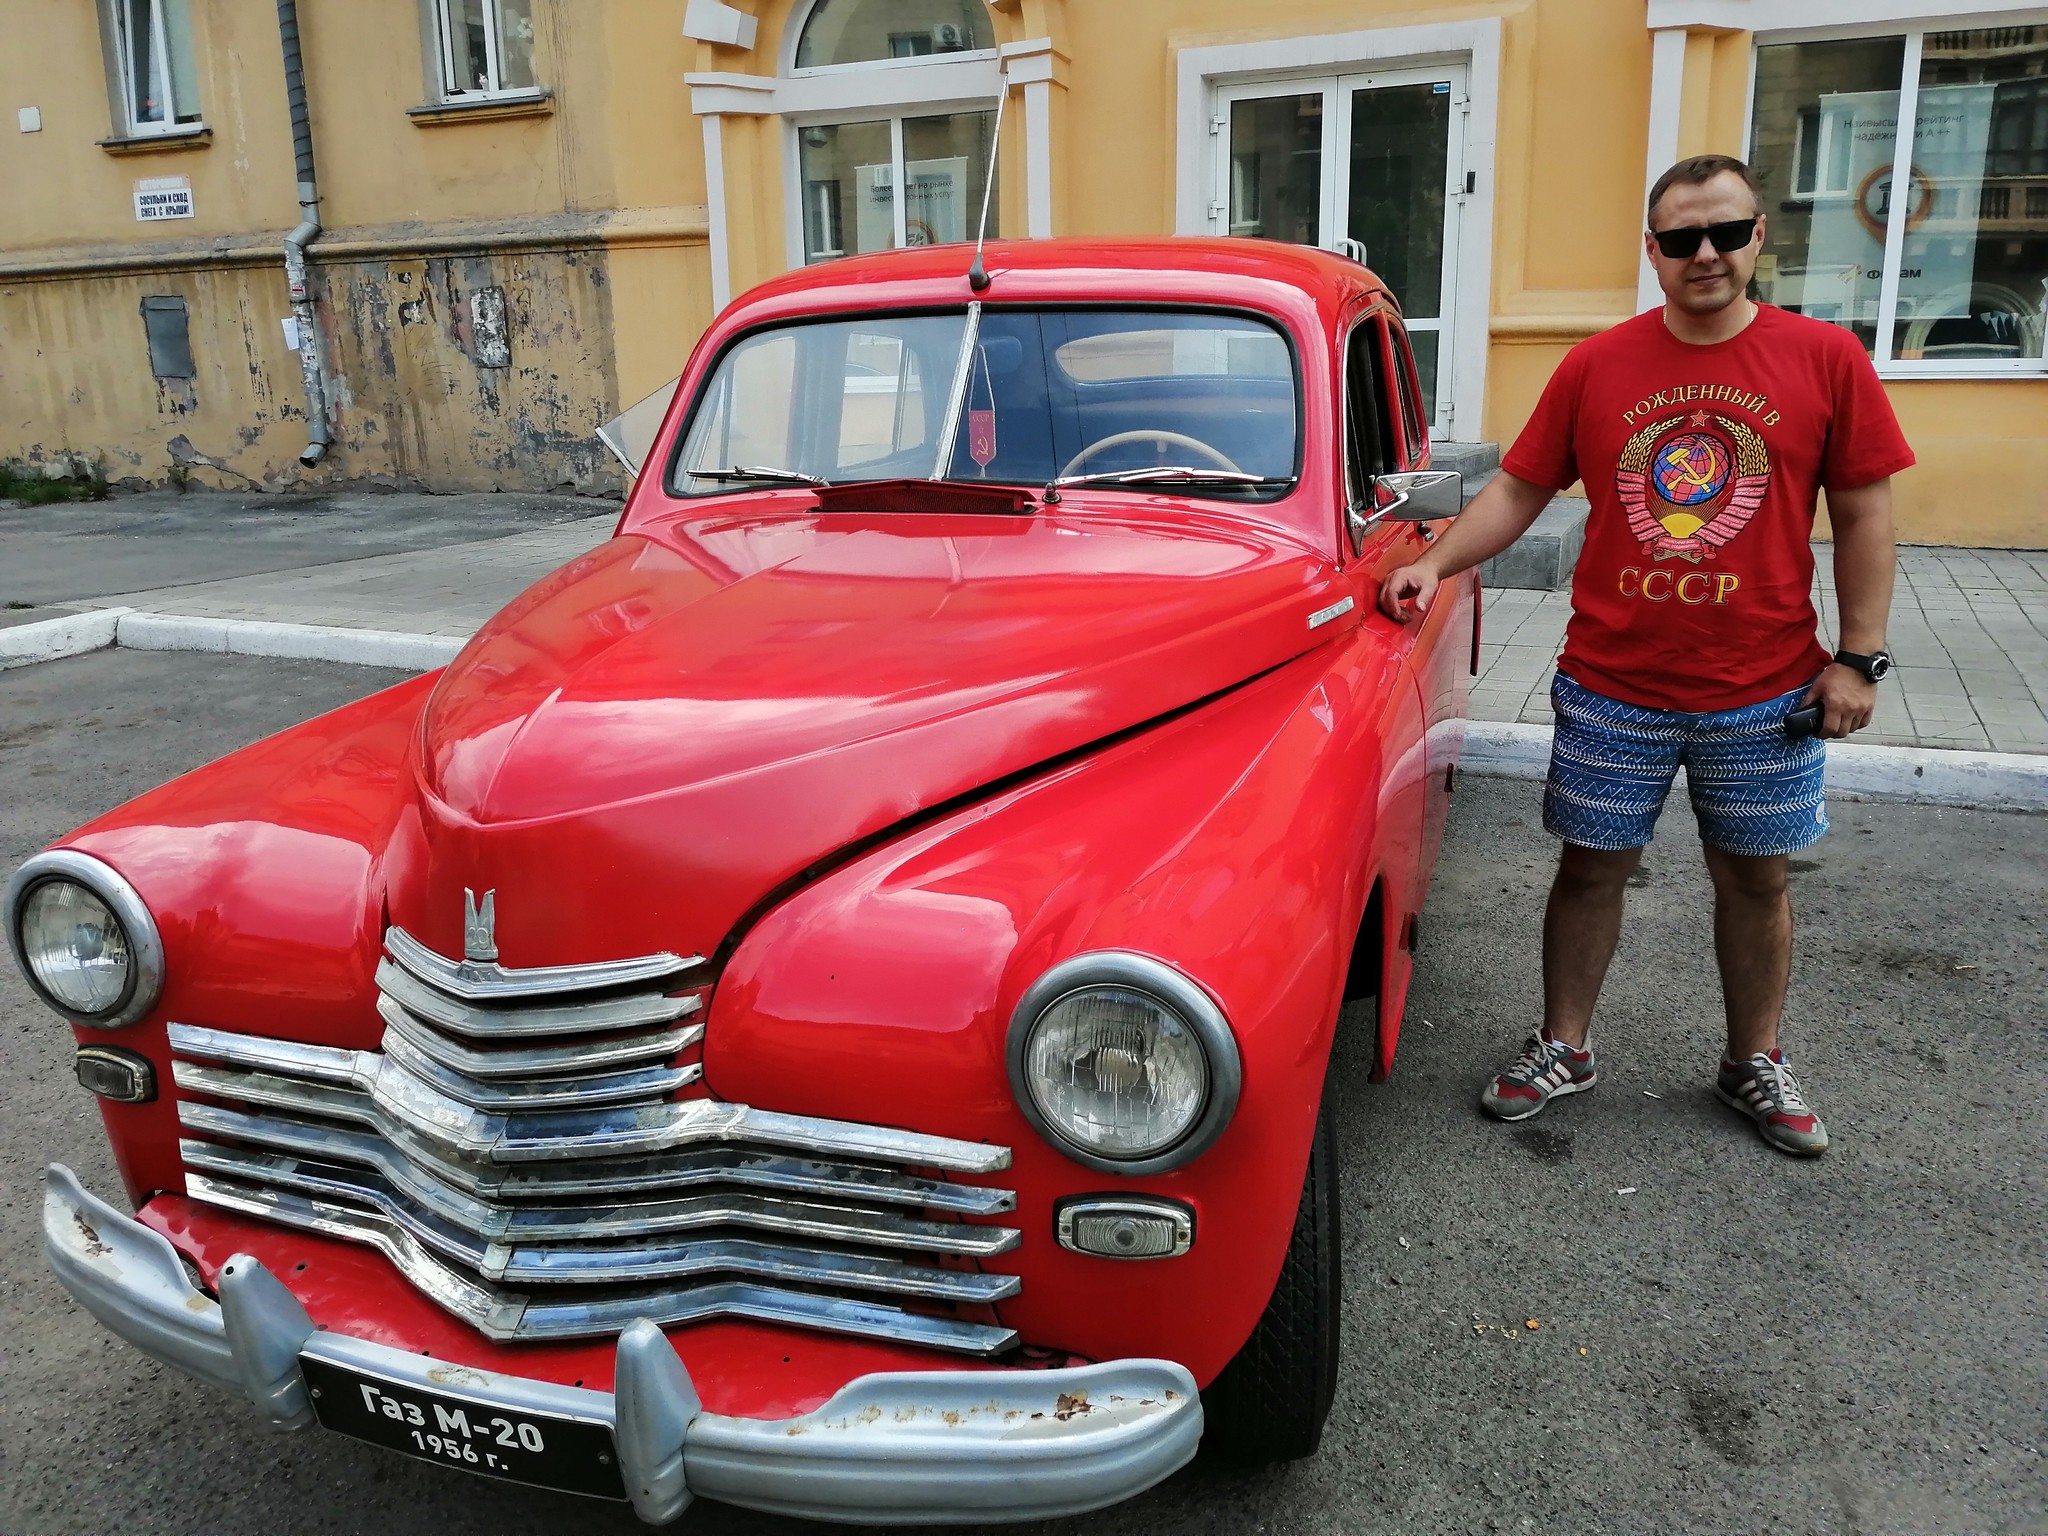 Day off, rolled out Victory) - My, Retro car, Gaz M-20 Pobeda, Made in USSR